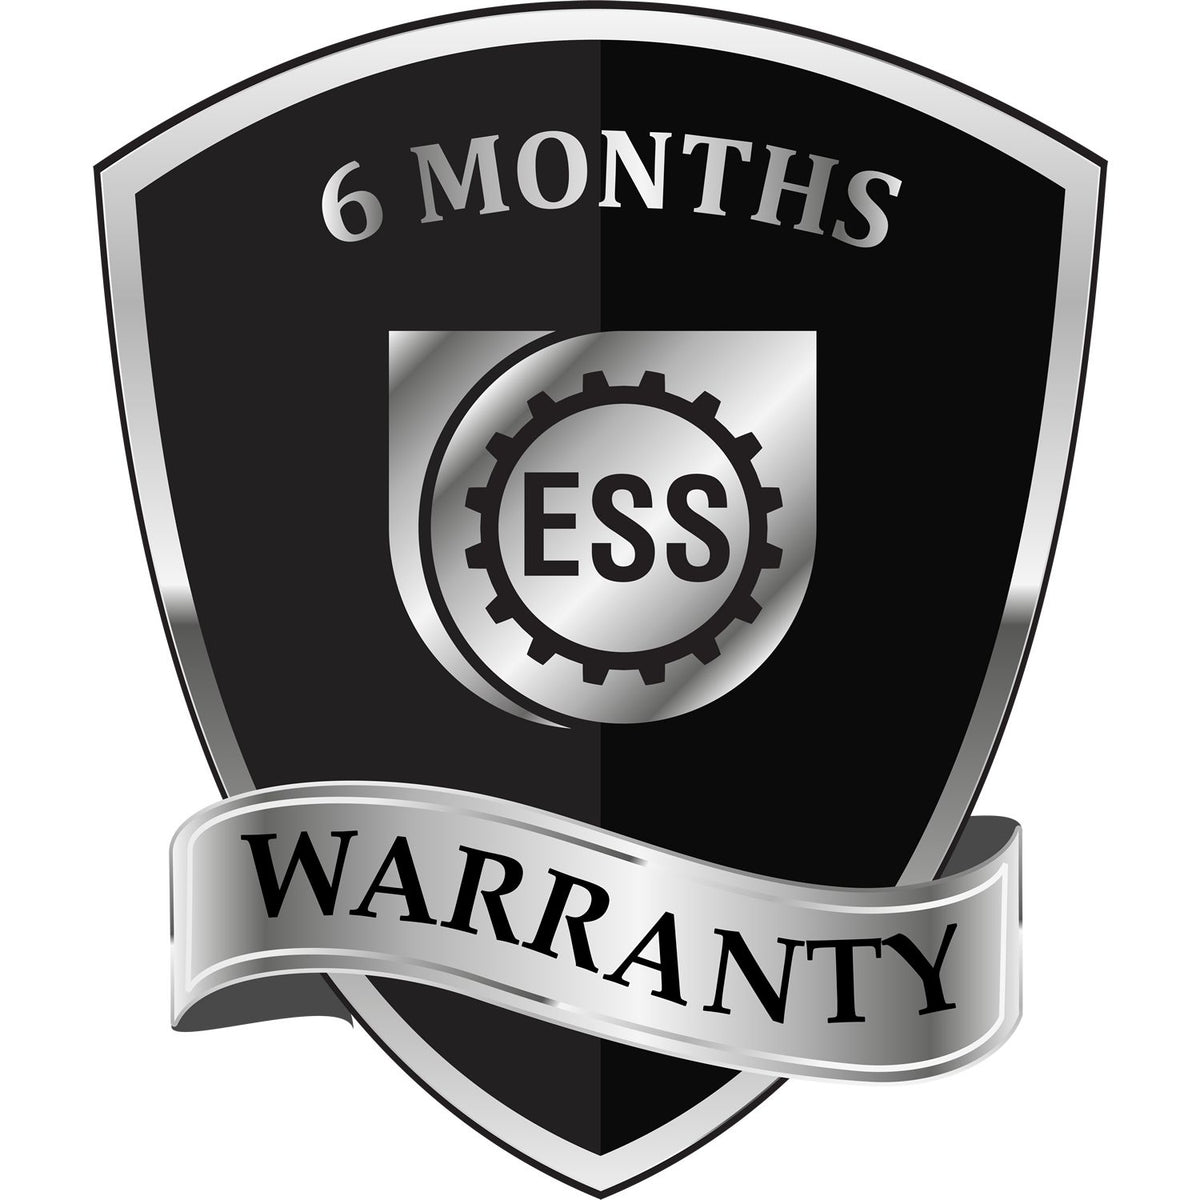 Professional Self Inking Rubber Stamp of Seal 3006 6 Month Warranty